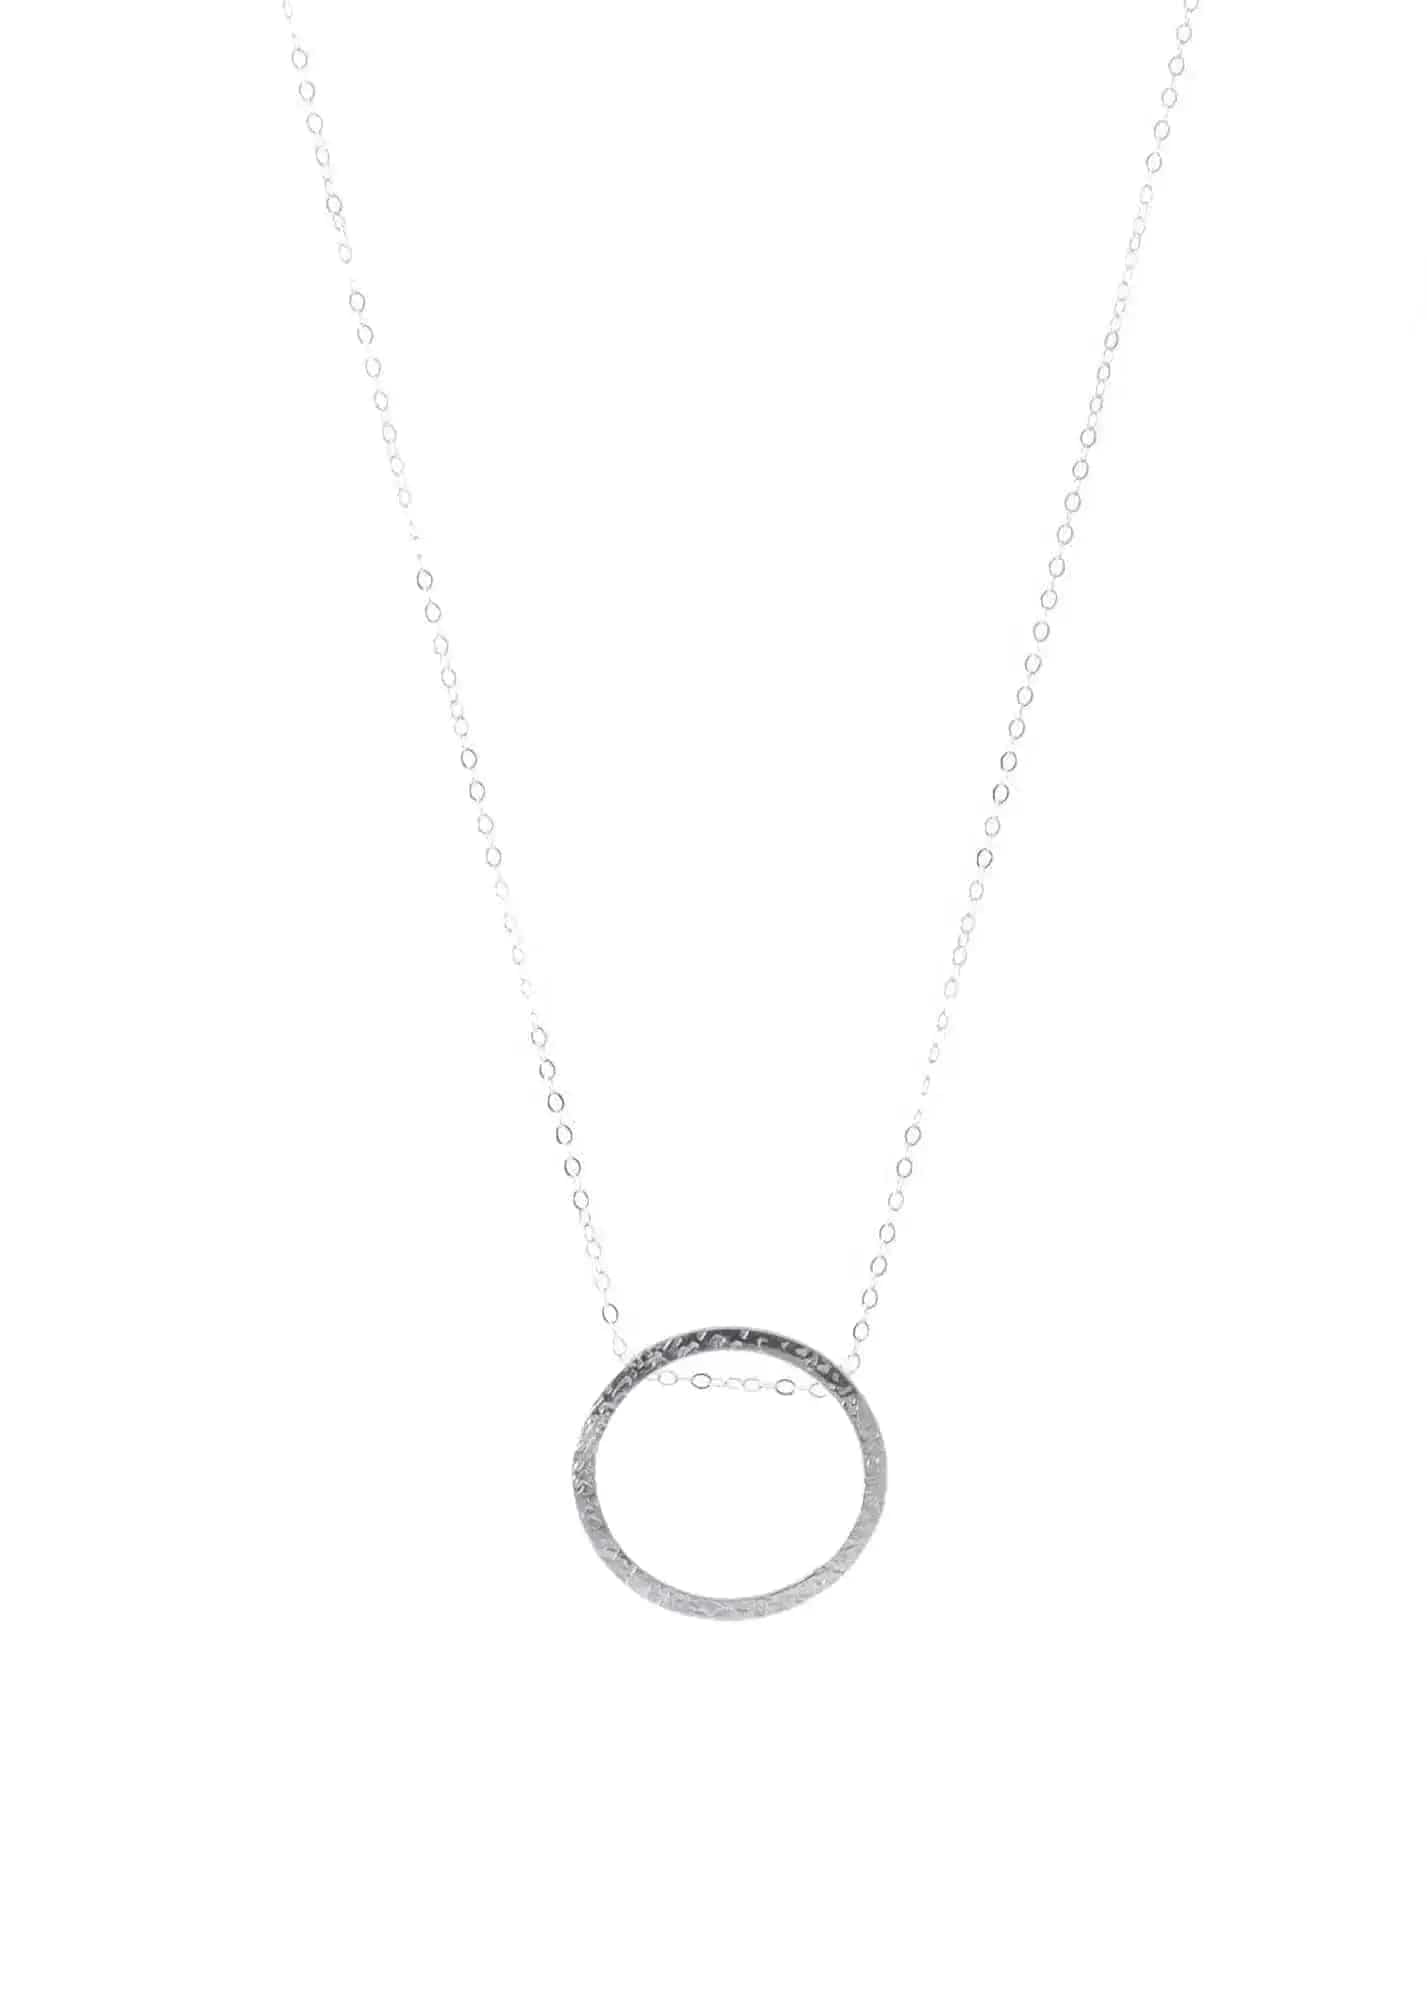 Aligned Circle Sterling Silver Necklace Liv & B Designs